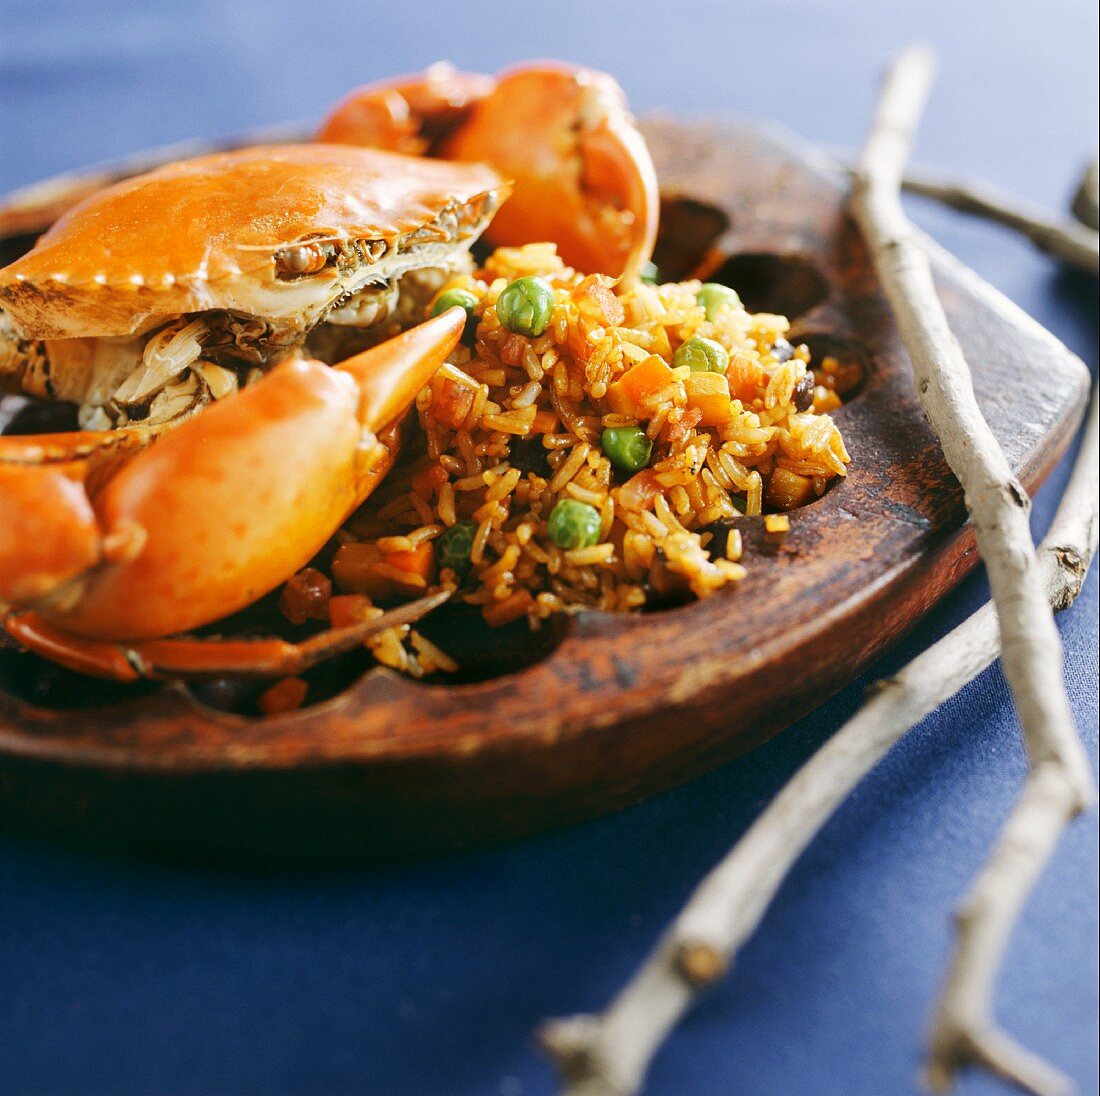 Cooked crab on vegetable rice